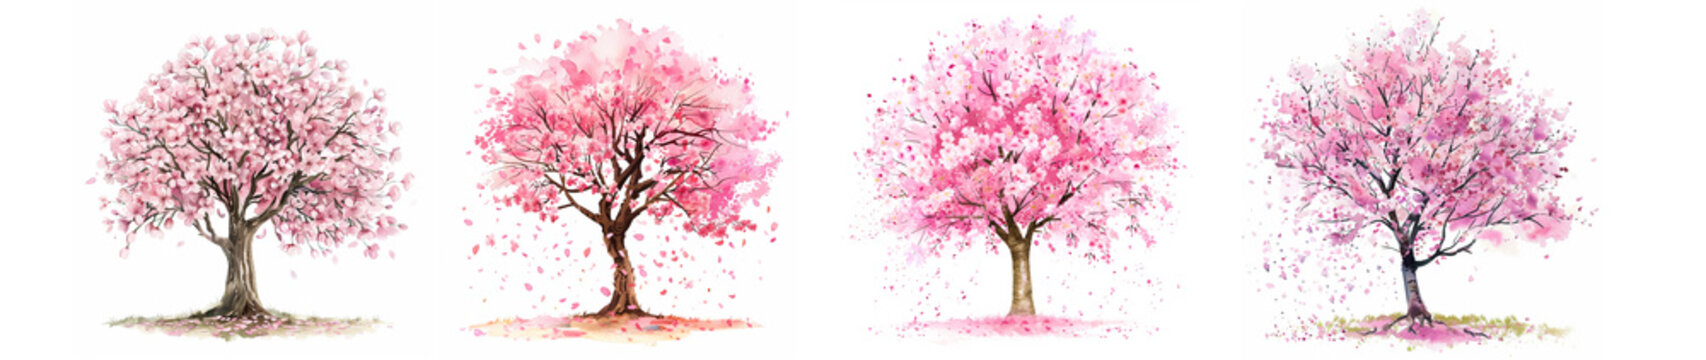 watercolor illustration clipart of a whimsical cherry blossom tree in full bloom with delicate pink petals fluttering in the spring breeze.